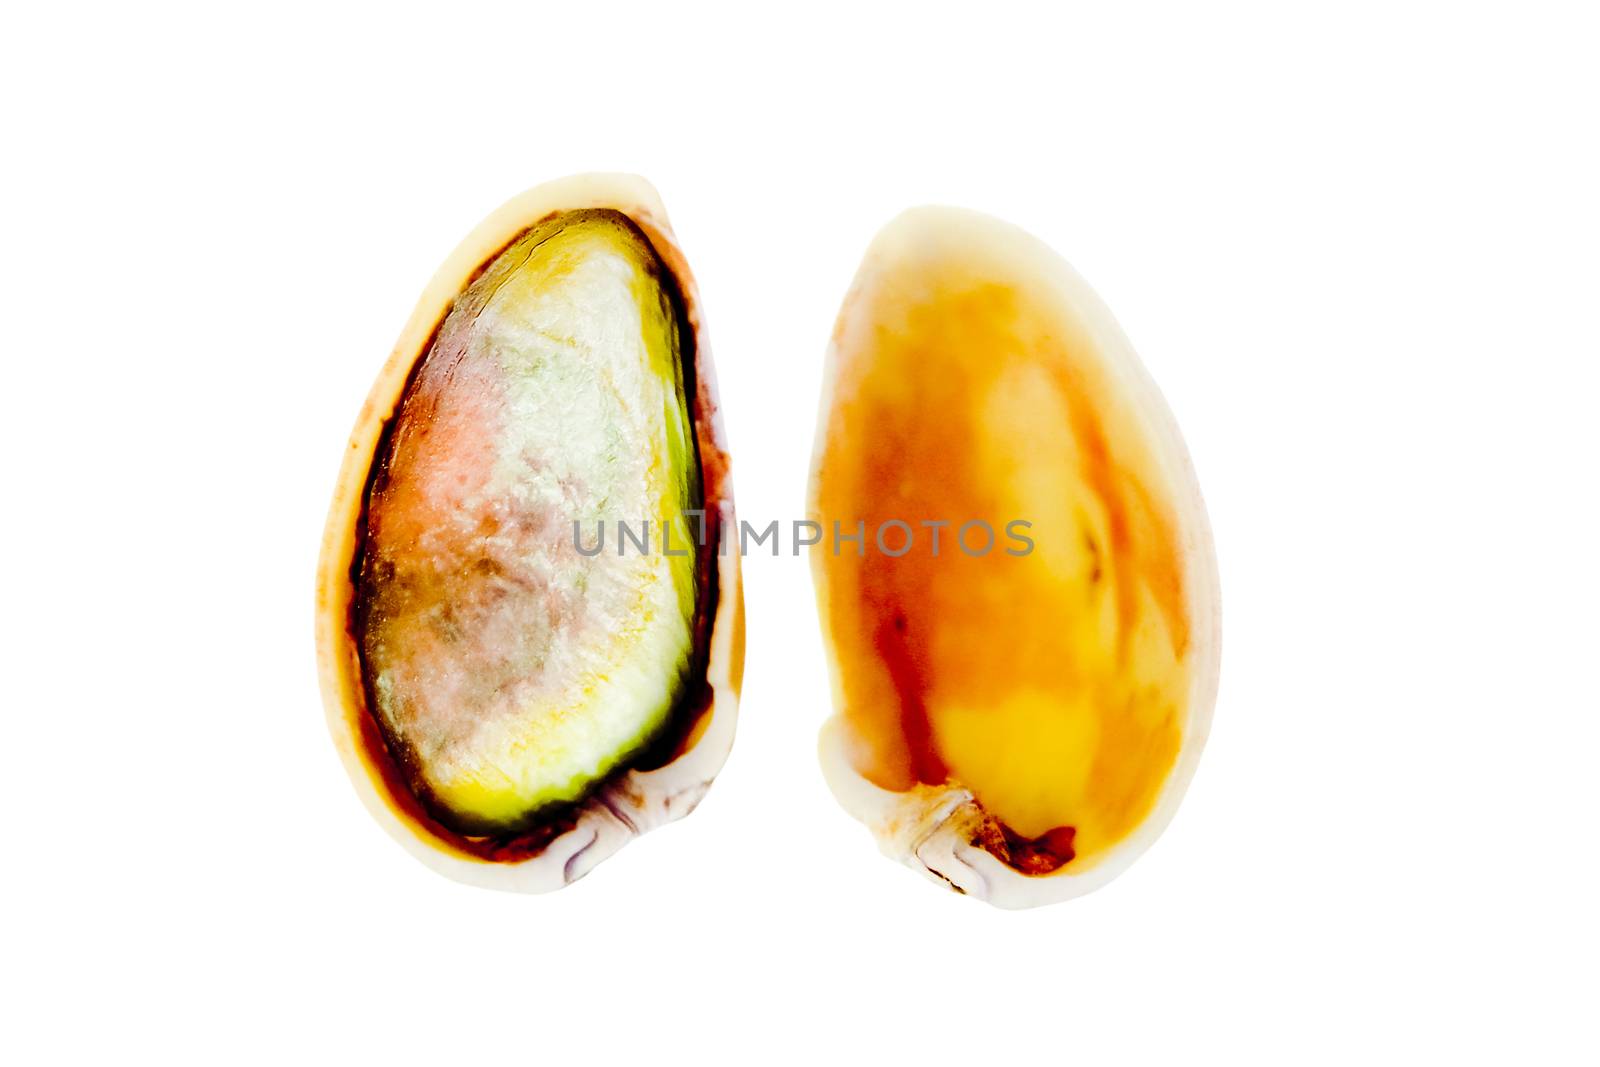 Roasted pistachio seed with shell by yands